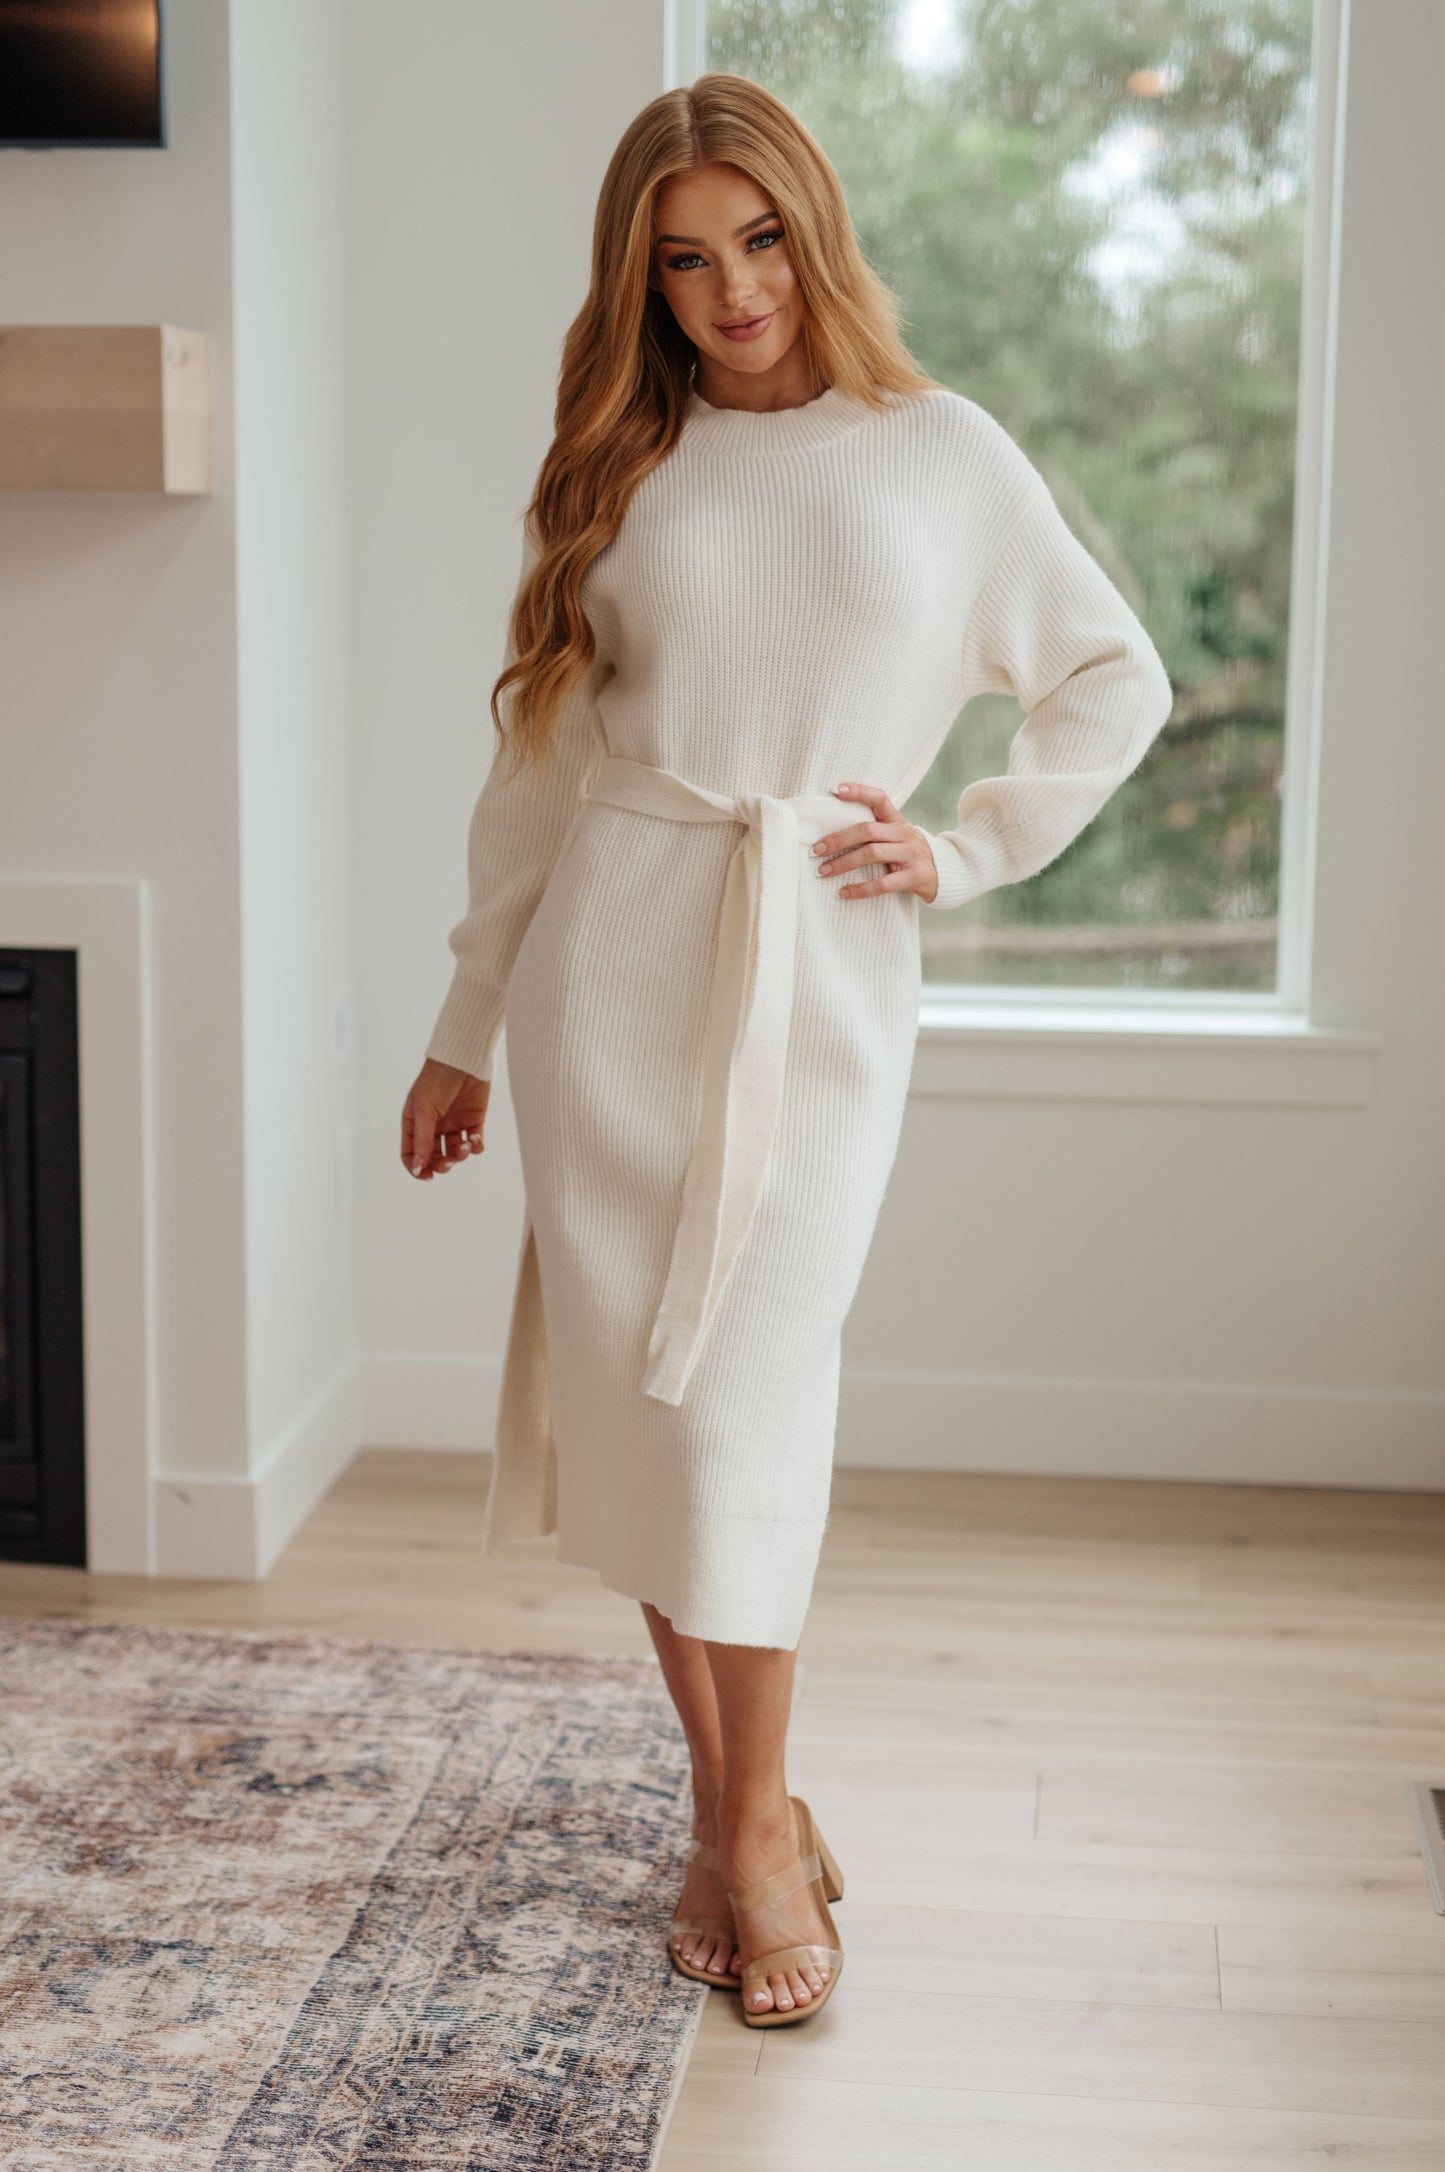 Hello Darling Sweater Dress - Dixie Hike & Style